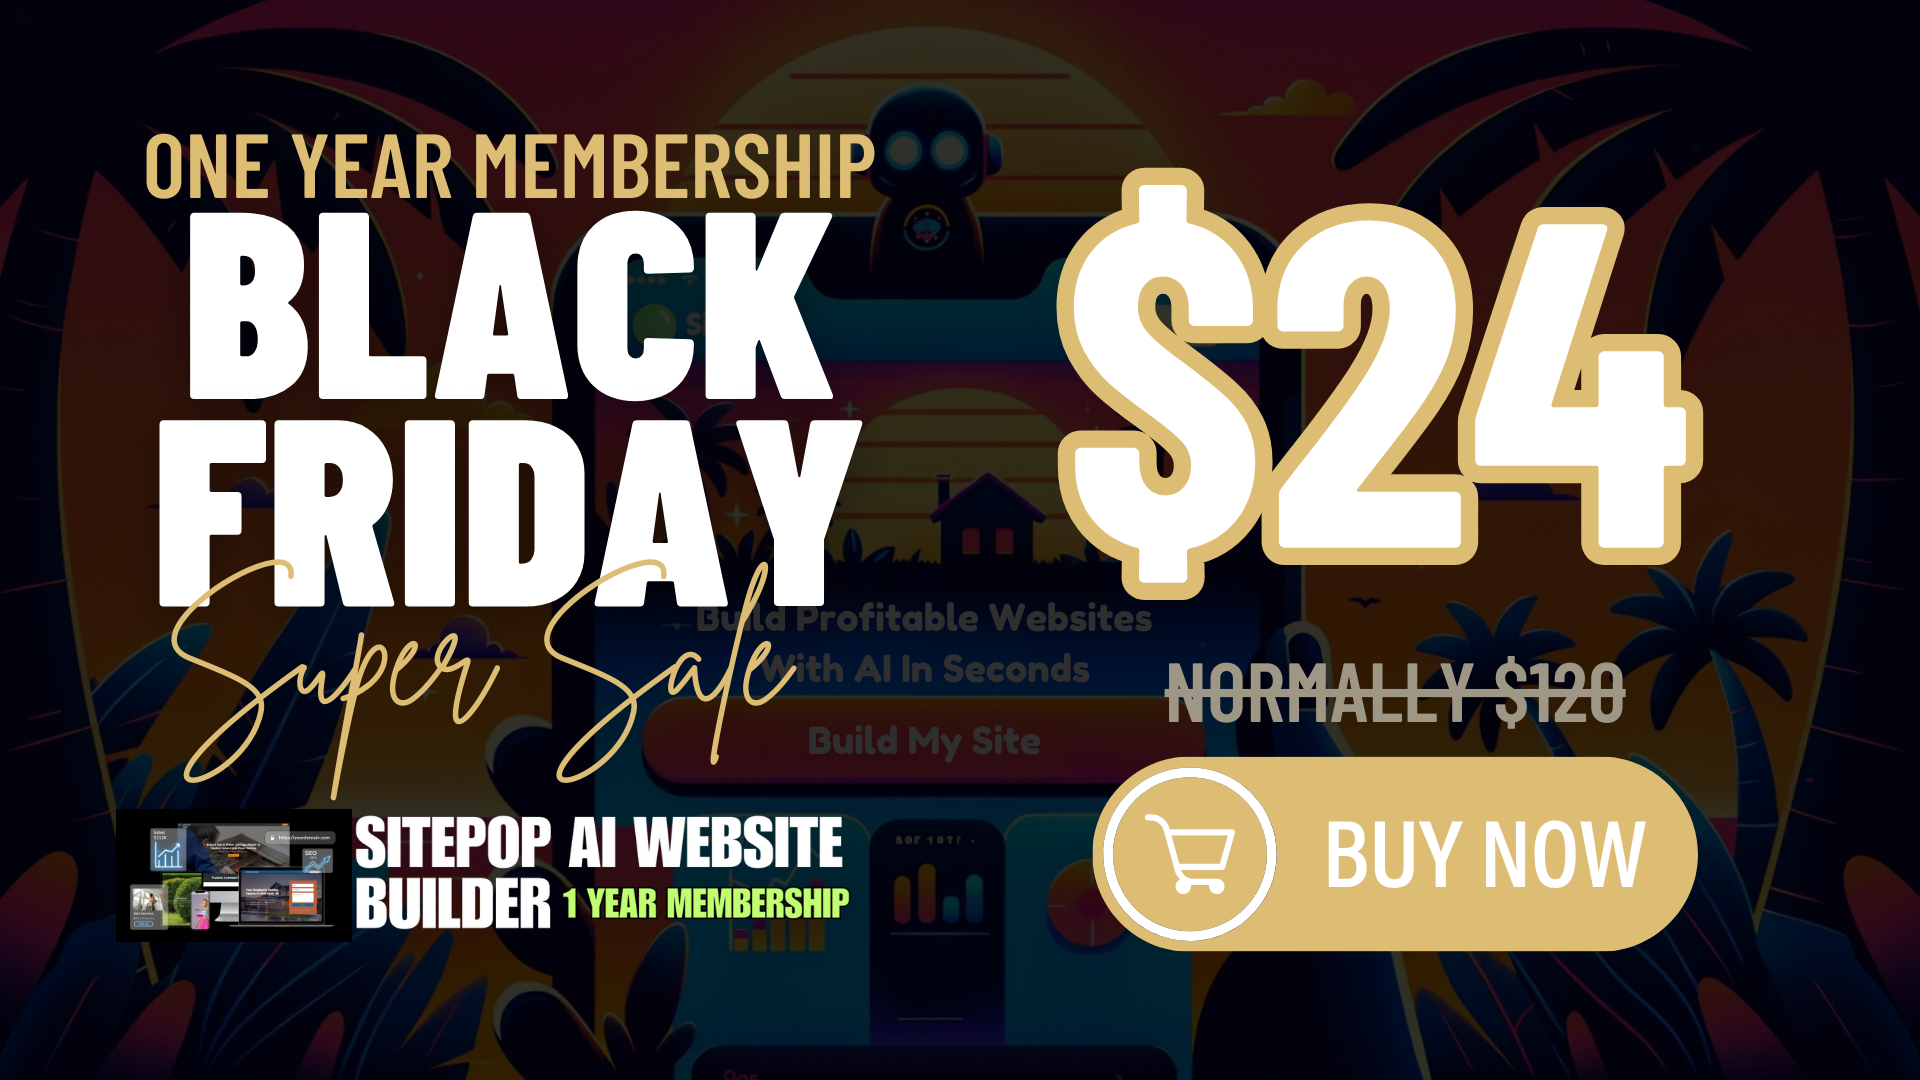 Black Friday Blowout: One-Year Membership for Just $24!